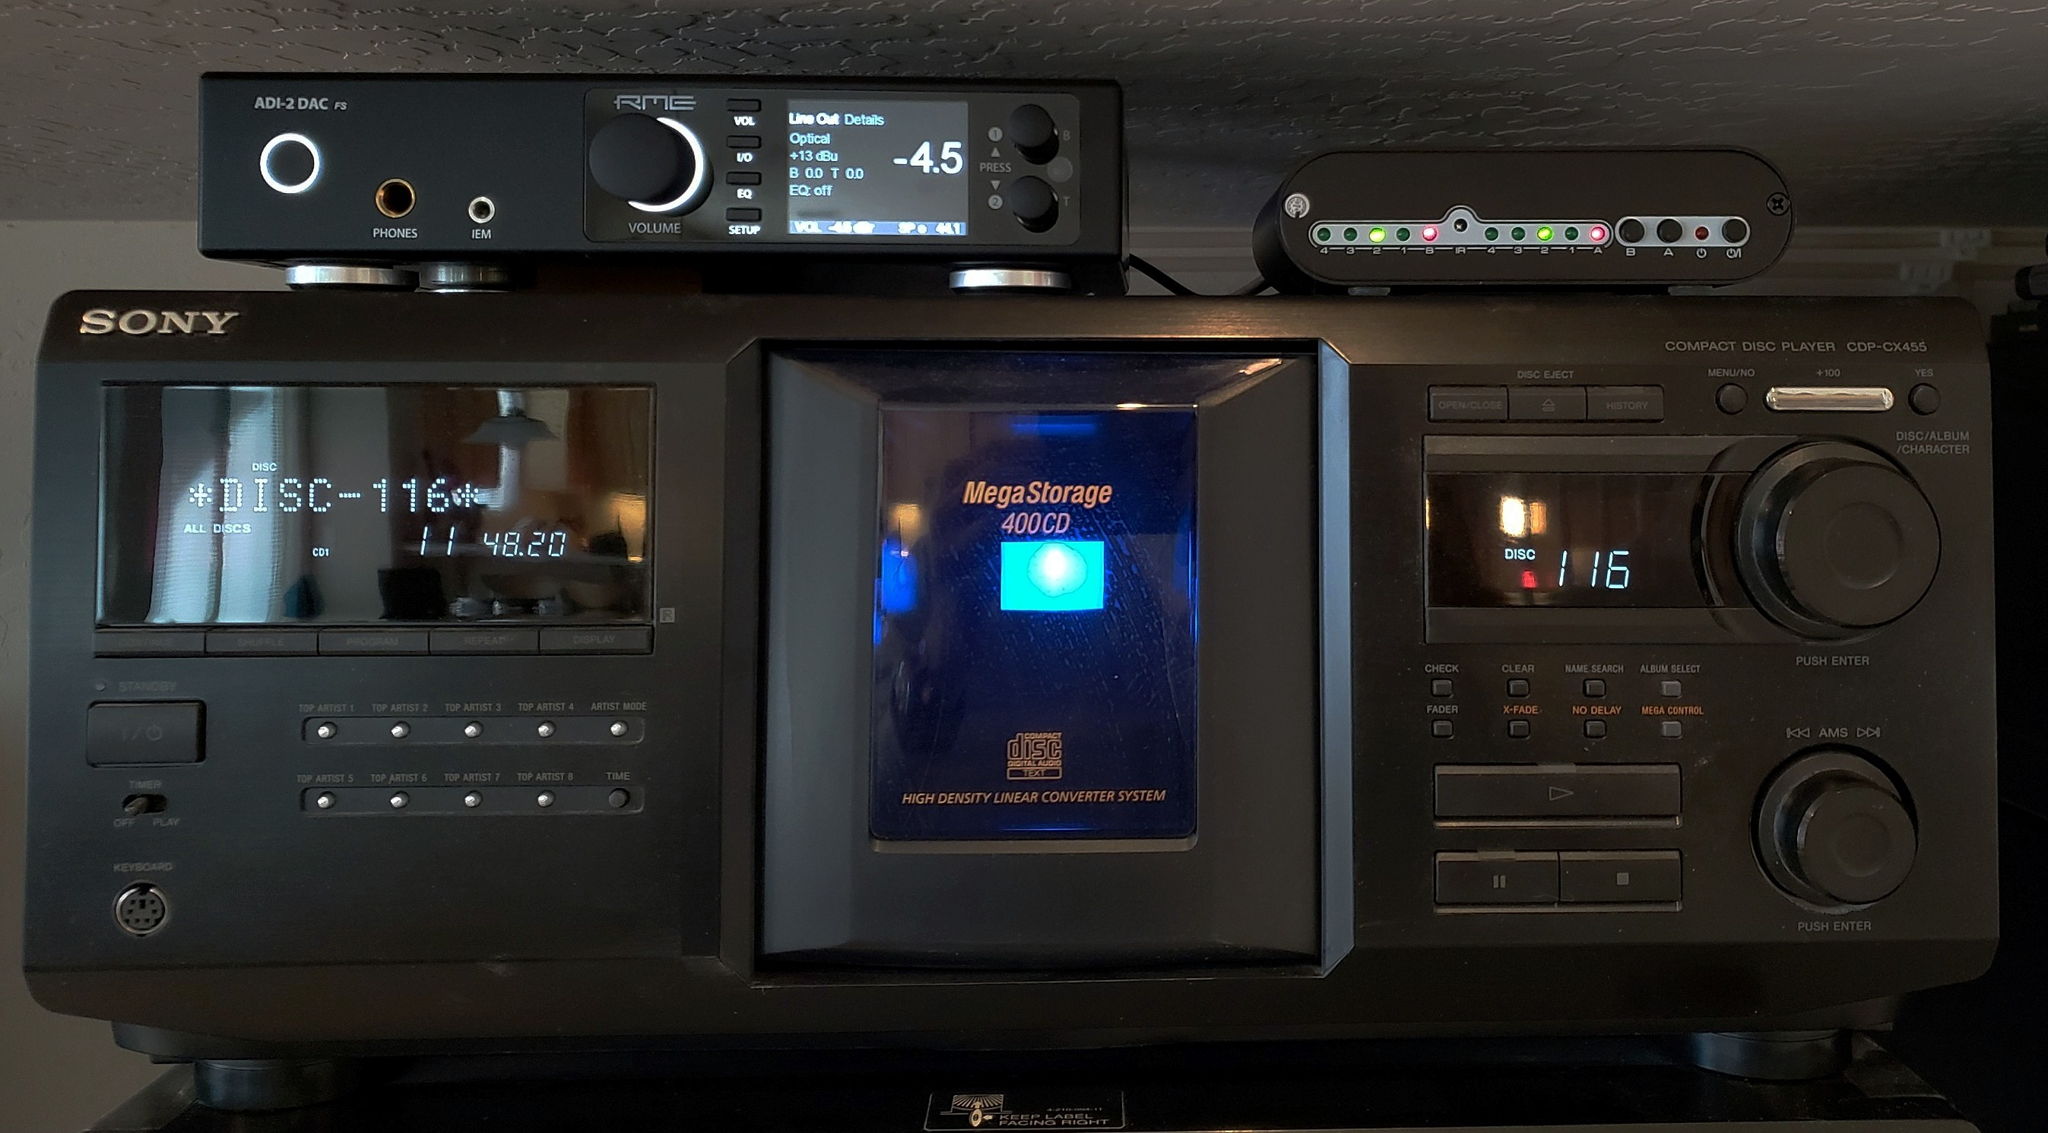 CD Jukebox (1 of 4), DAC, & TOSLINK Switch